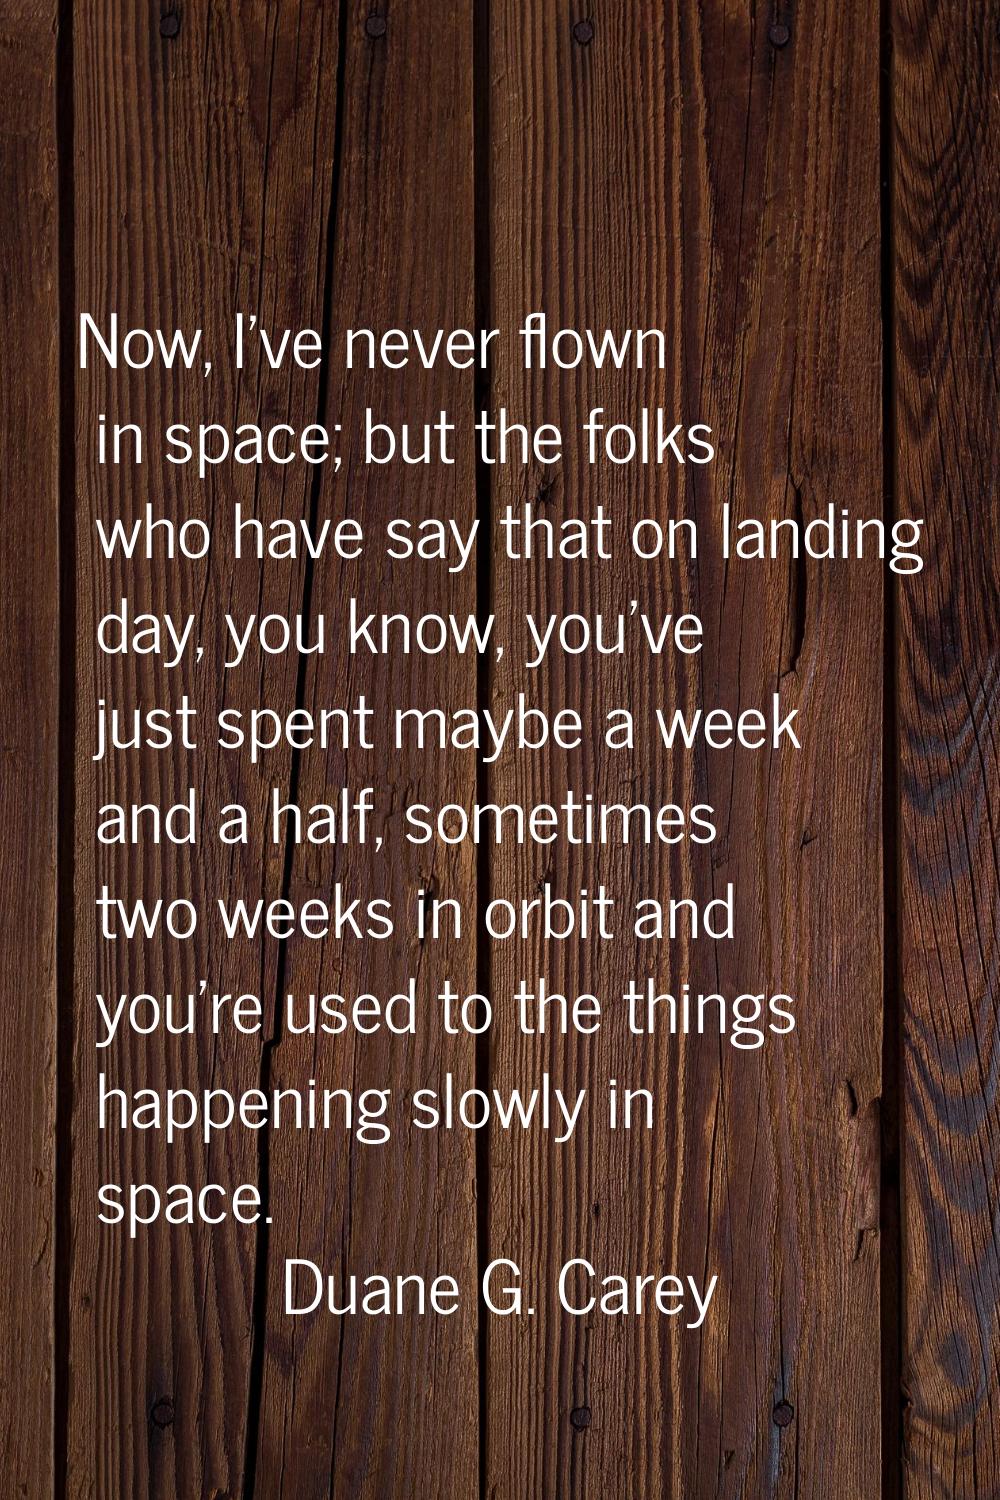 Now, I've never flown in space; but the folks who have say that on landing day, you know, you've ju